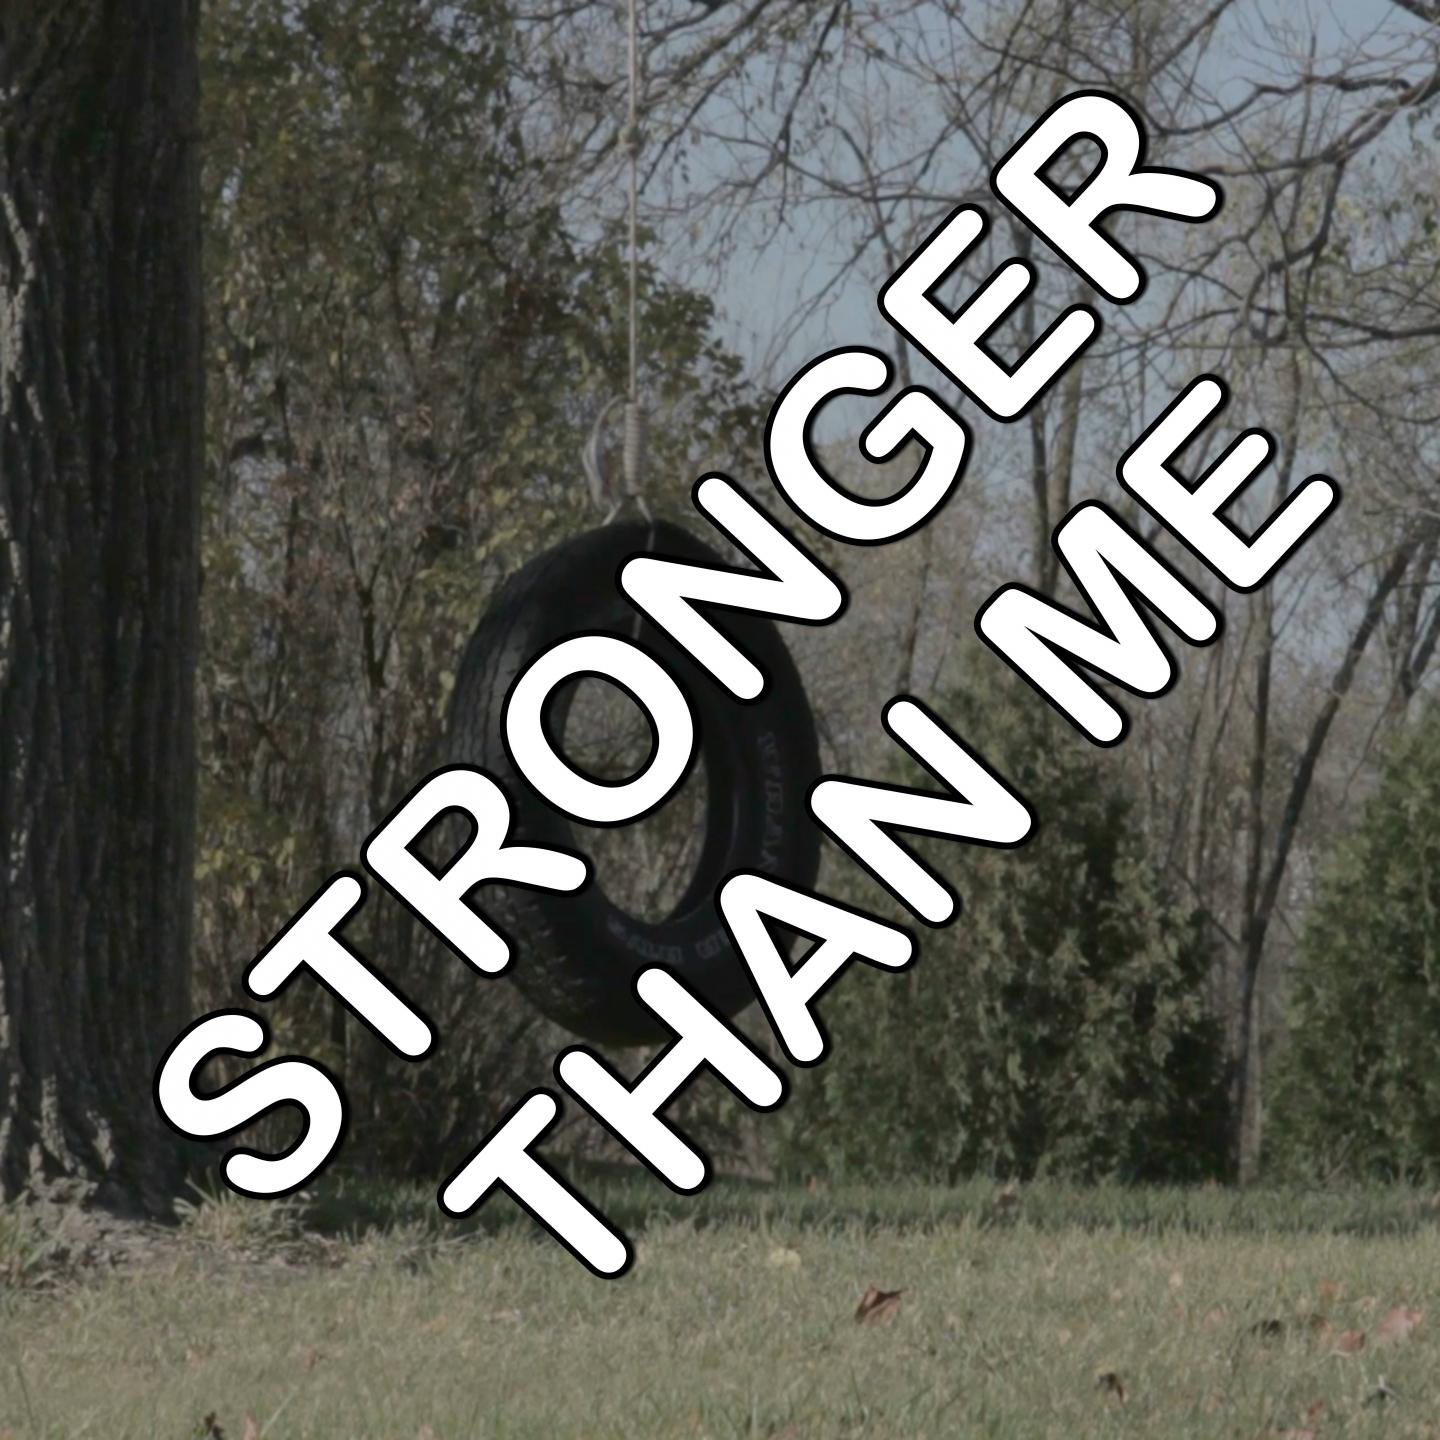 Stronger Than Me - Tribute to Amy Winehouse